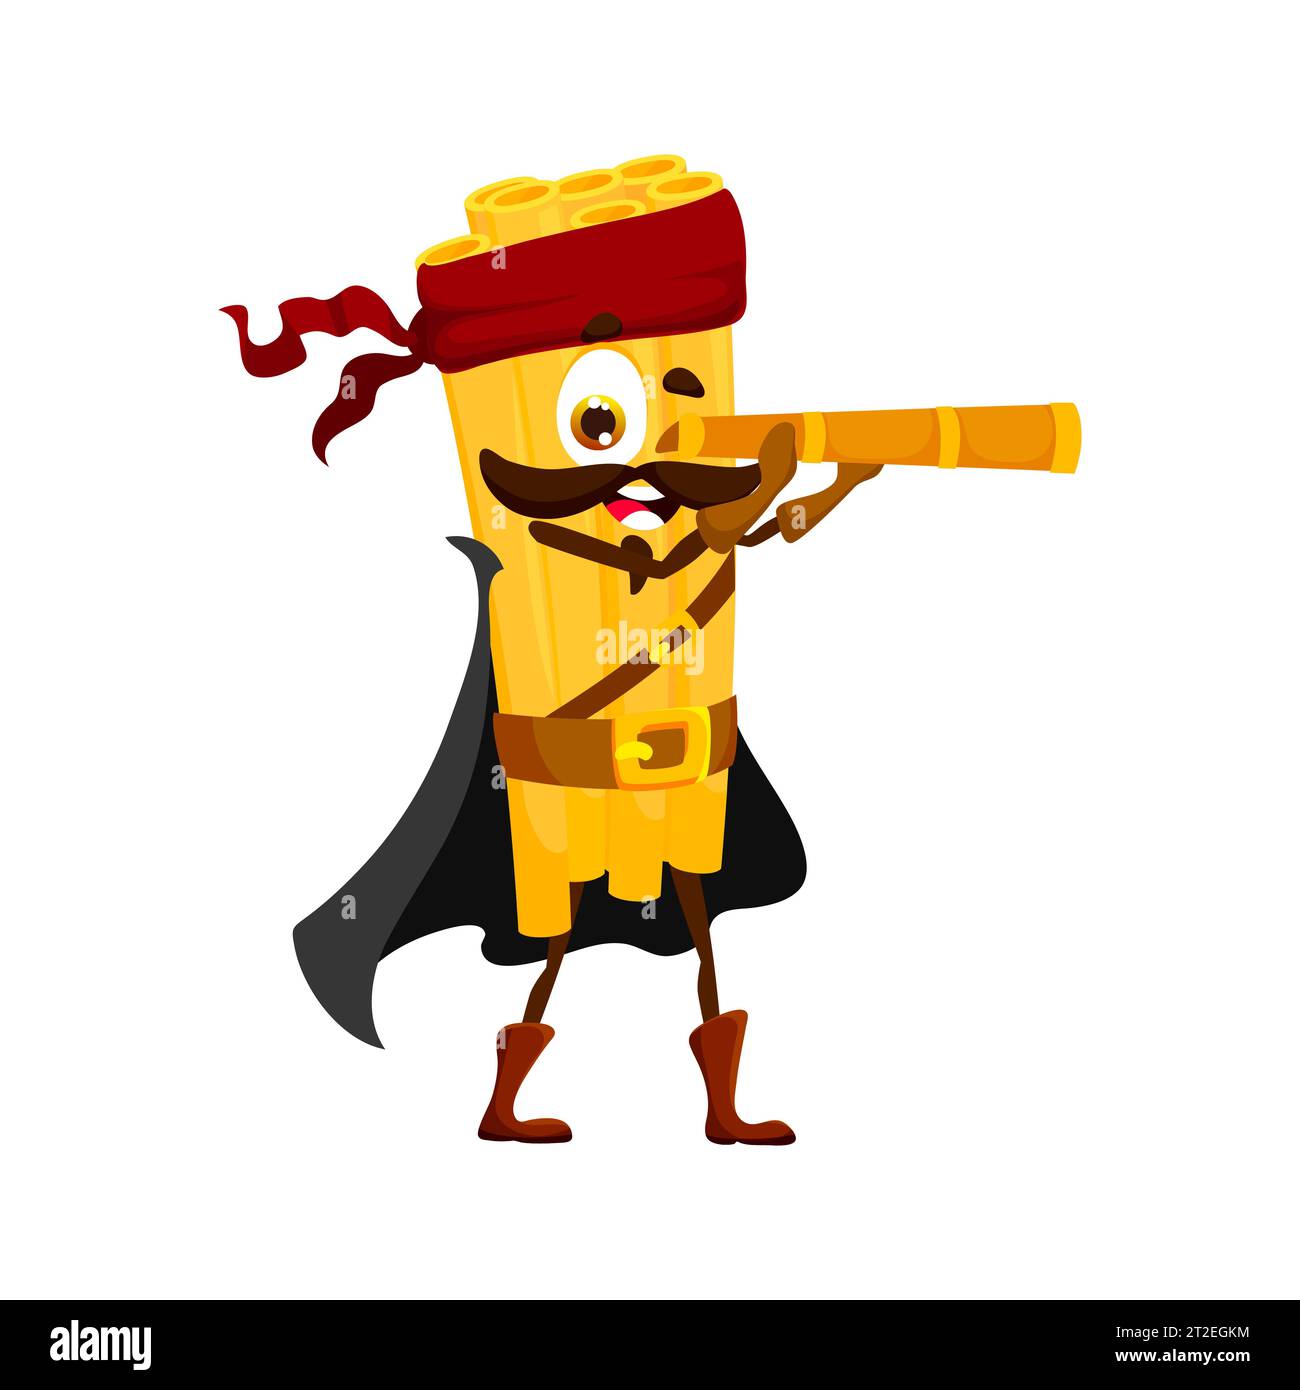 https://c8.alamy.com/comp/2T2EGKM/cartoon-italian-pasta-pirate-or-corsair-character-with-spyglass-vector-traditional-food-of-italy-piracy-funny-bucatini-macaroni-pirate-captain-or-sailor-personage-looking-for-treasure-island-2T2EGKM.jpg